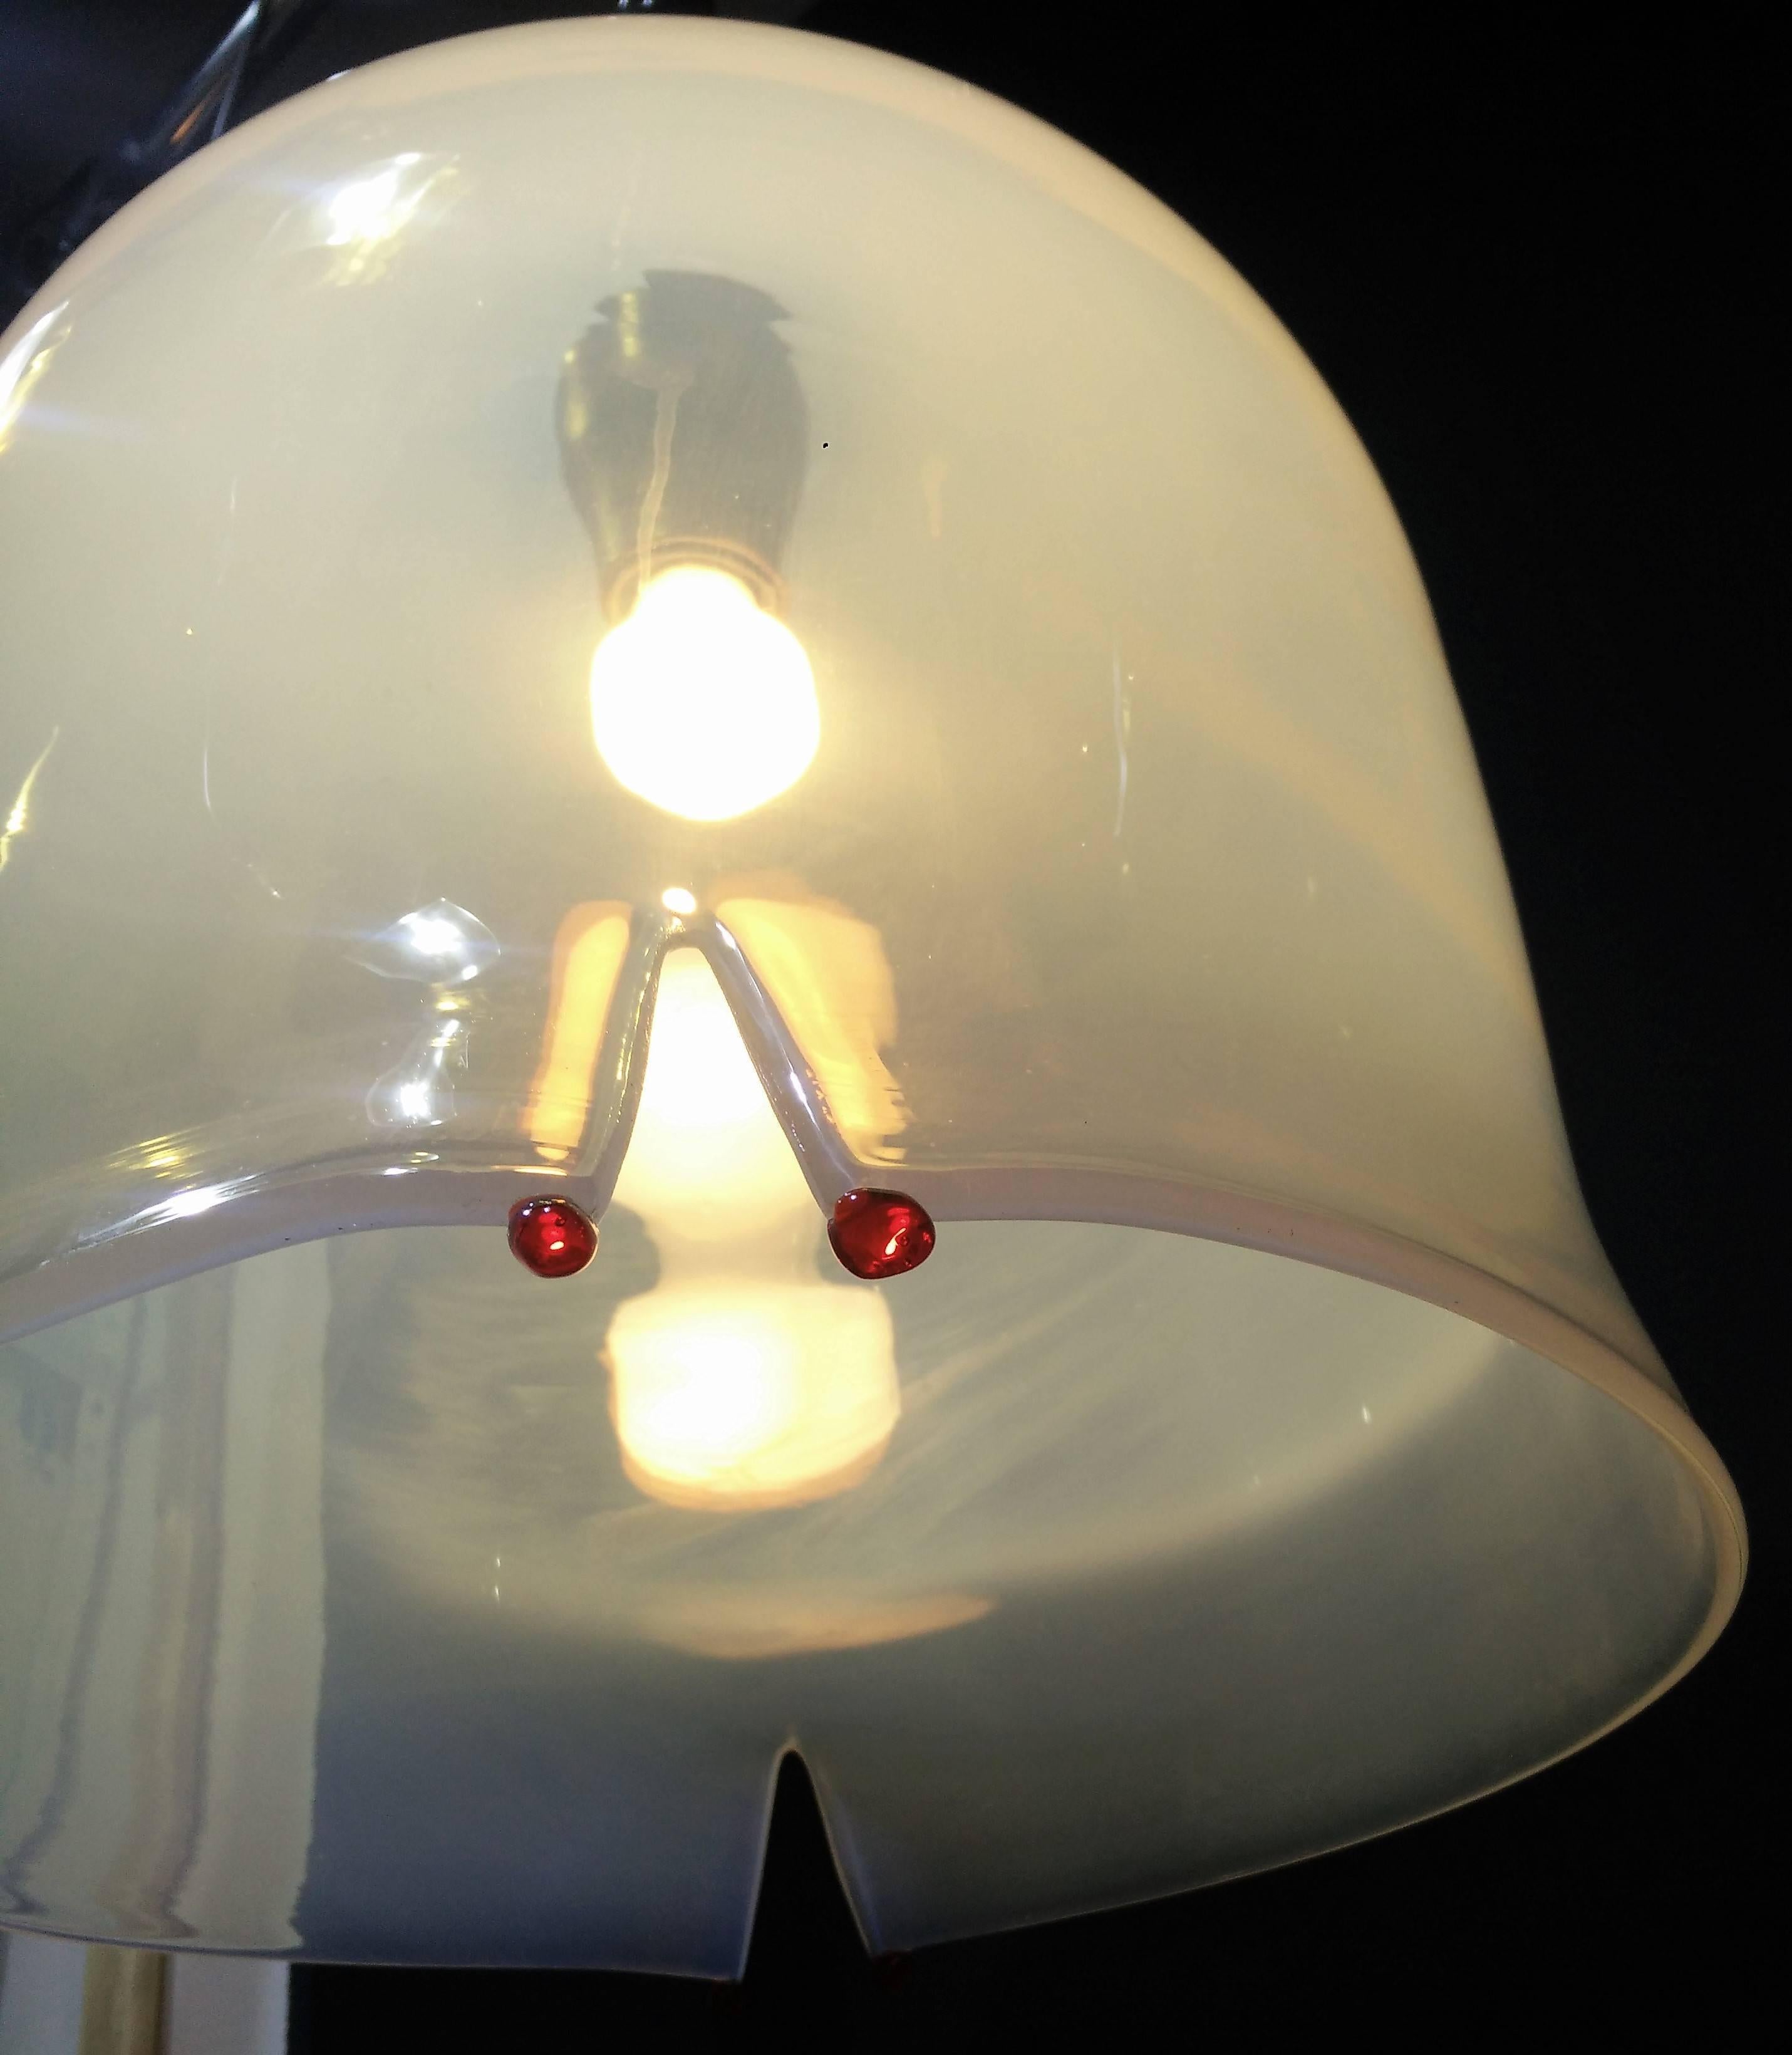 Italian Six Mid-Century Modern Bell Pendant Light by Leucos 1960 by Toso and Pamio